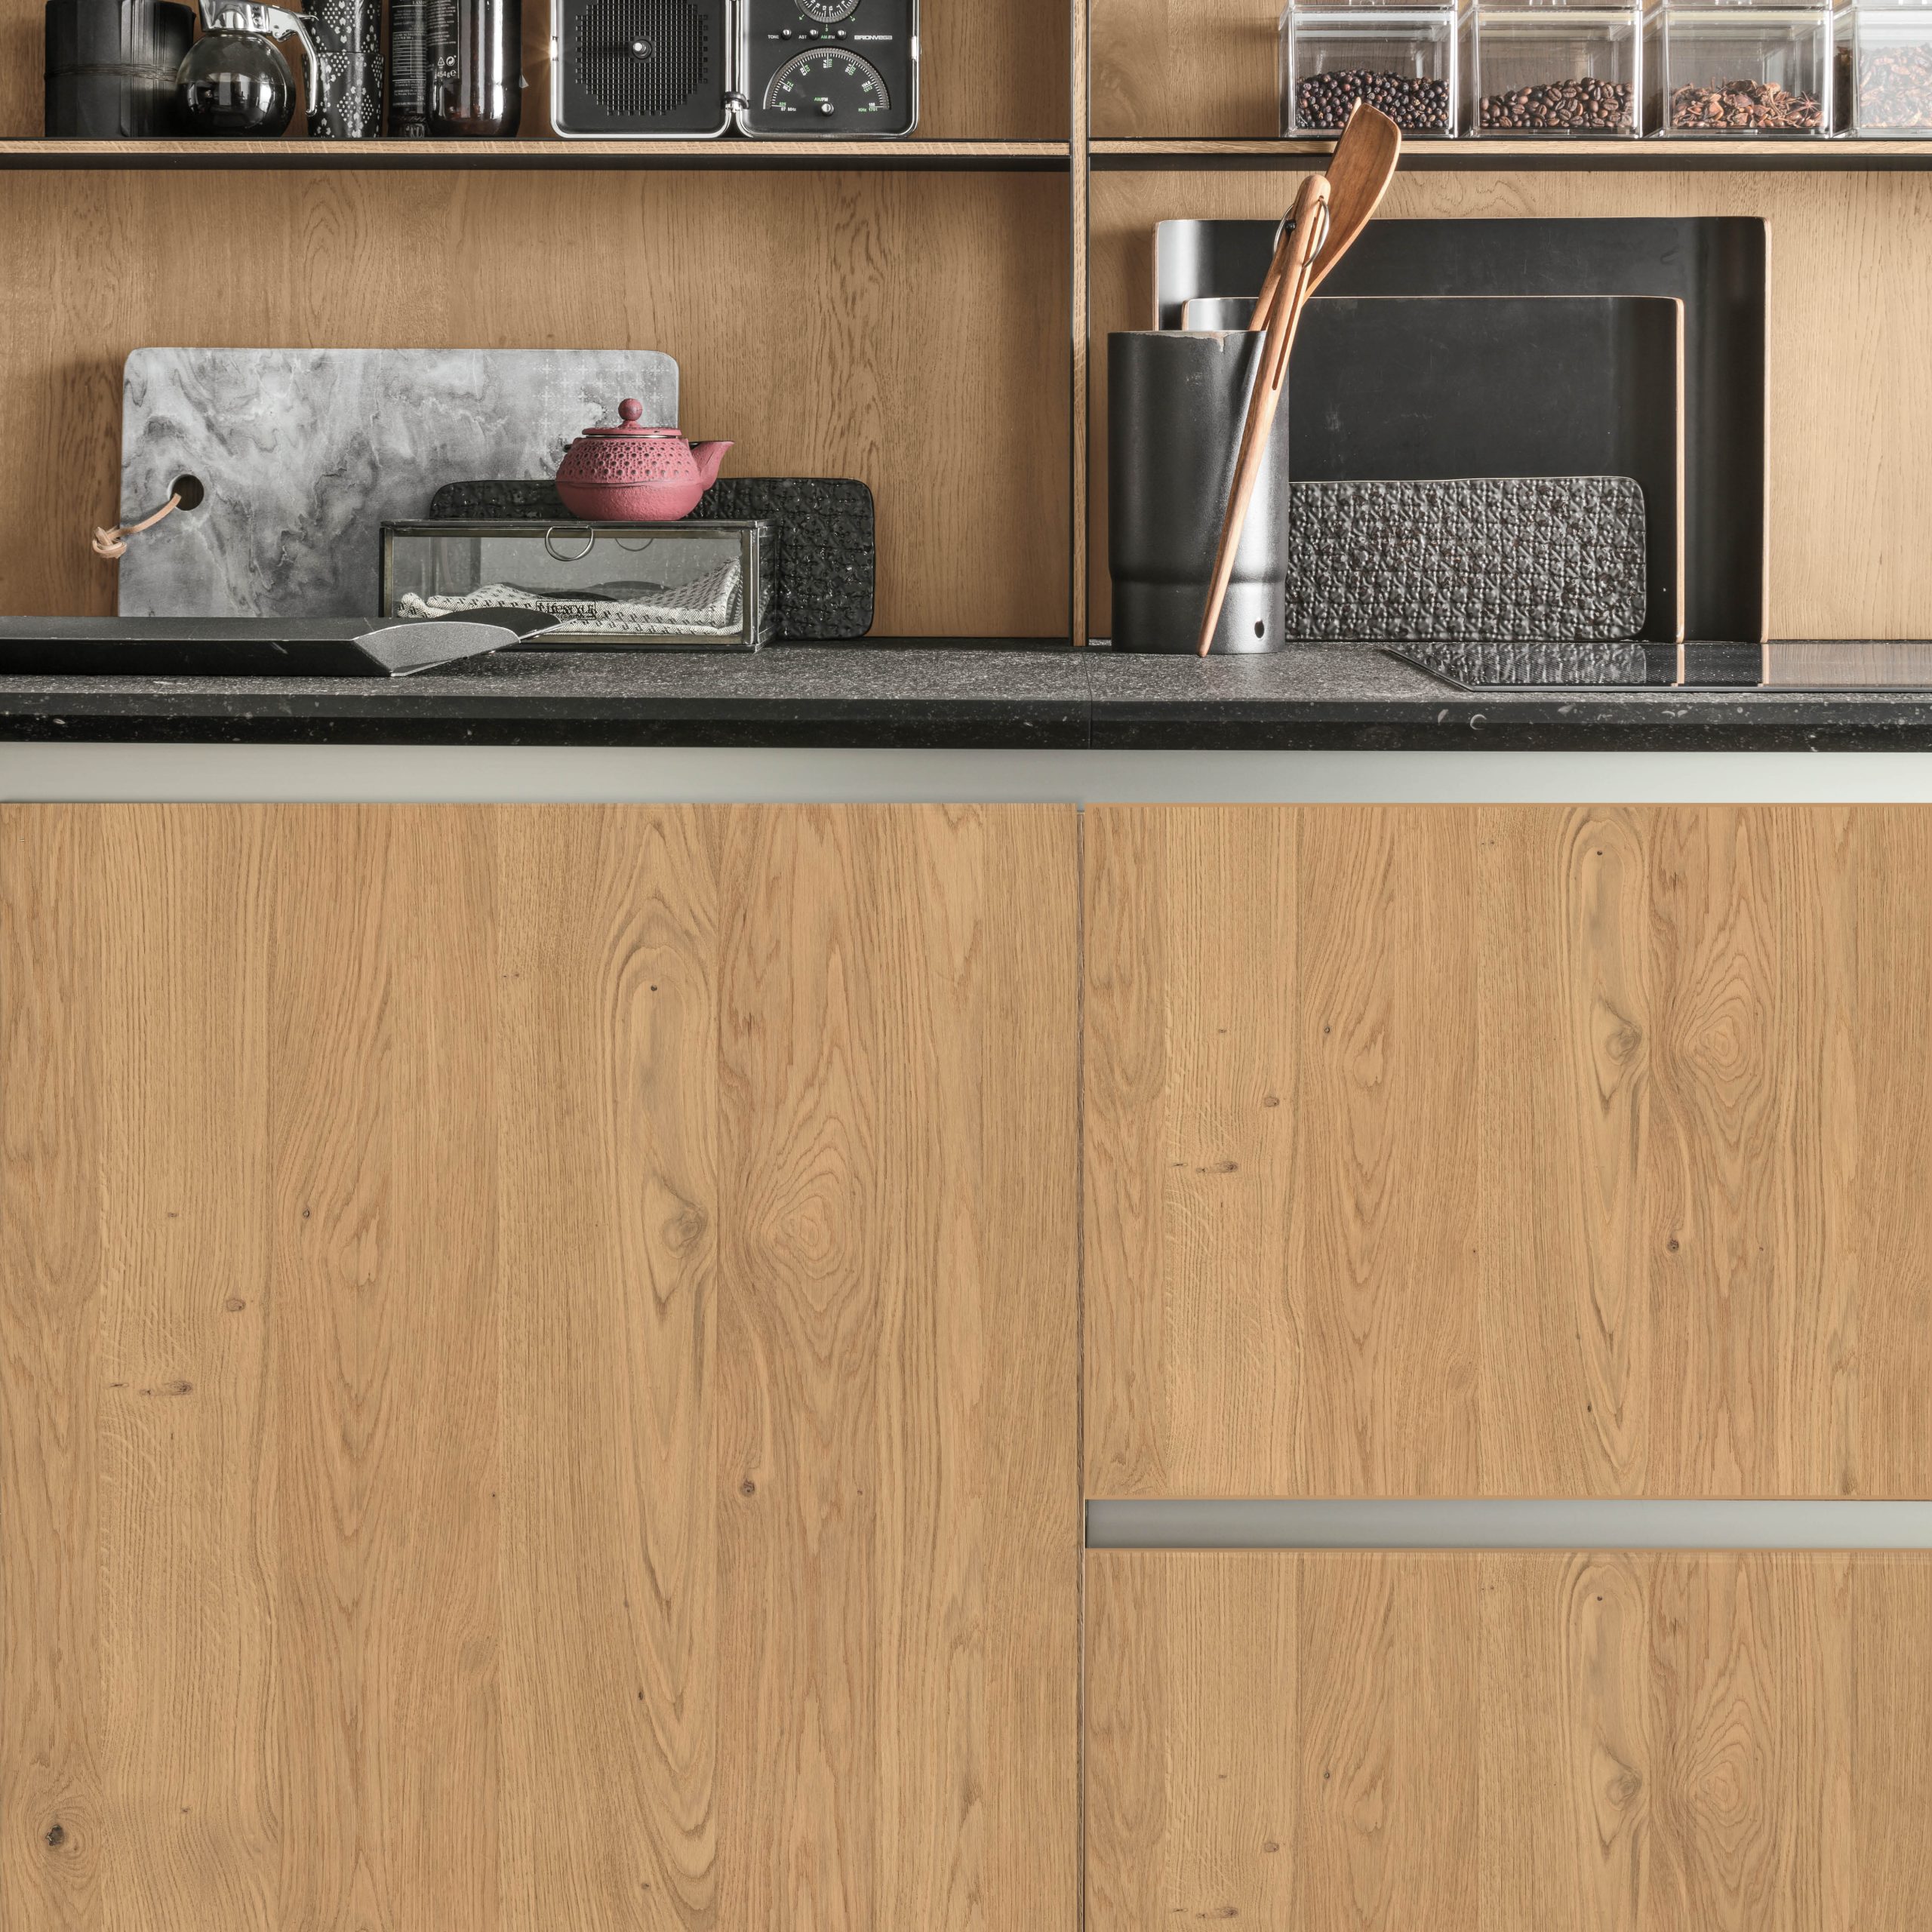 Modern Kitchens NYC - Natural - Rovere-Miele-Anta-Liscia2-Scaled-1 - Stosa Cucine
